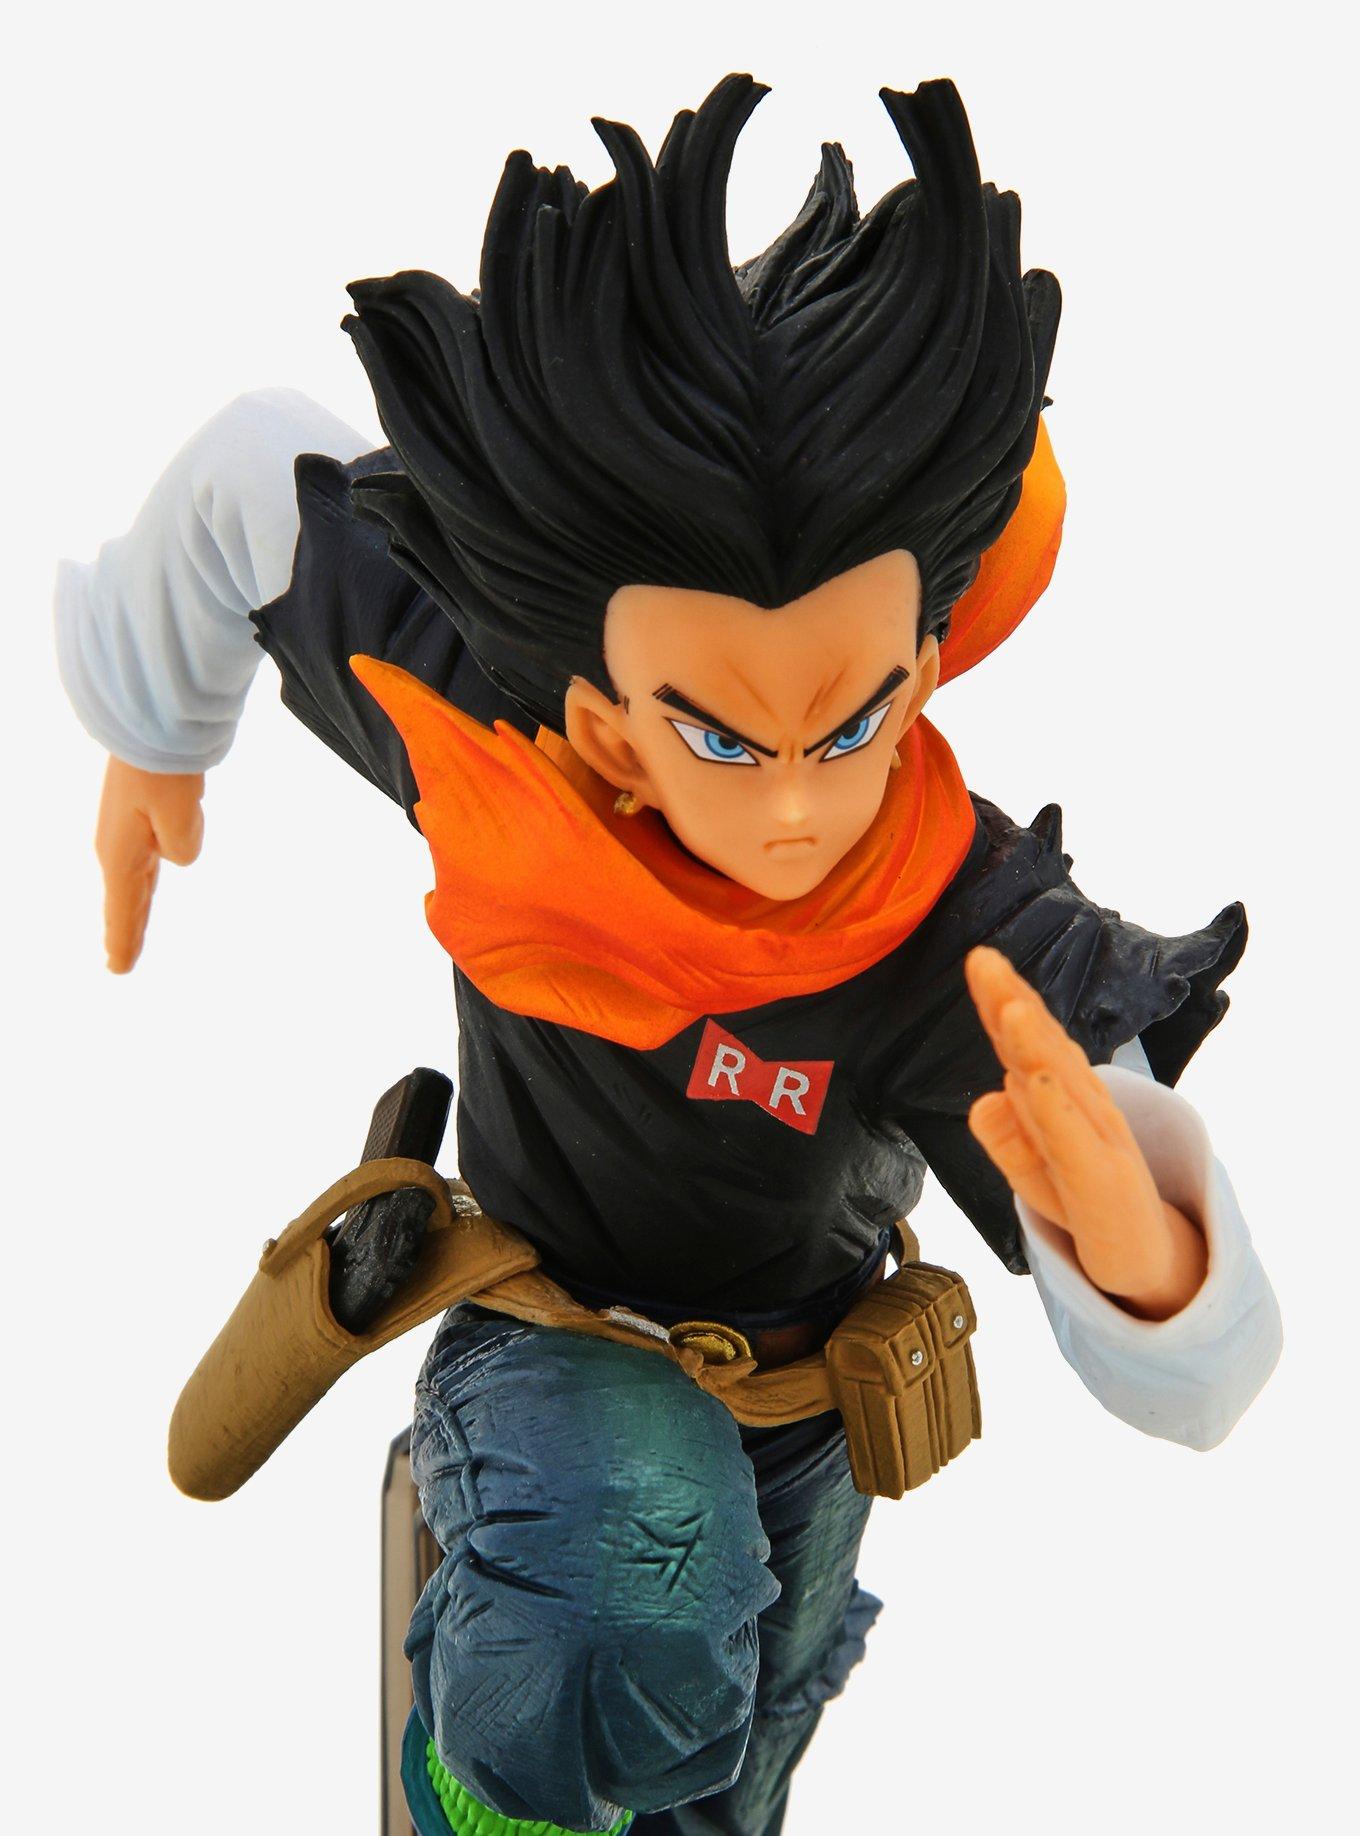 Dragon Ball Z World Figure Colosseum 2 Vol.3 Android 17 Collectible Figure, , alternate